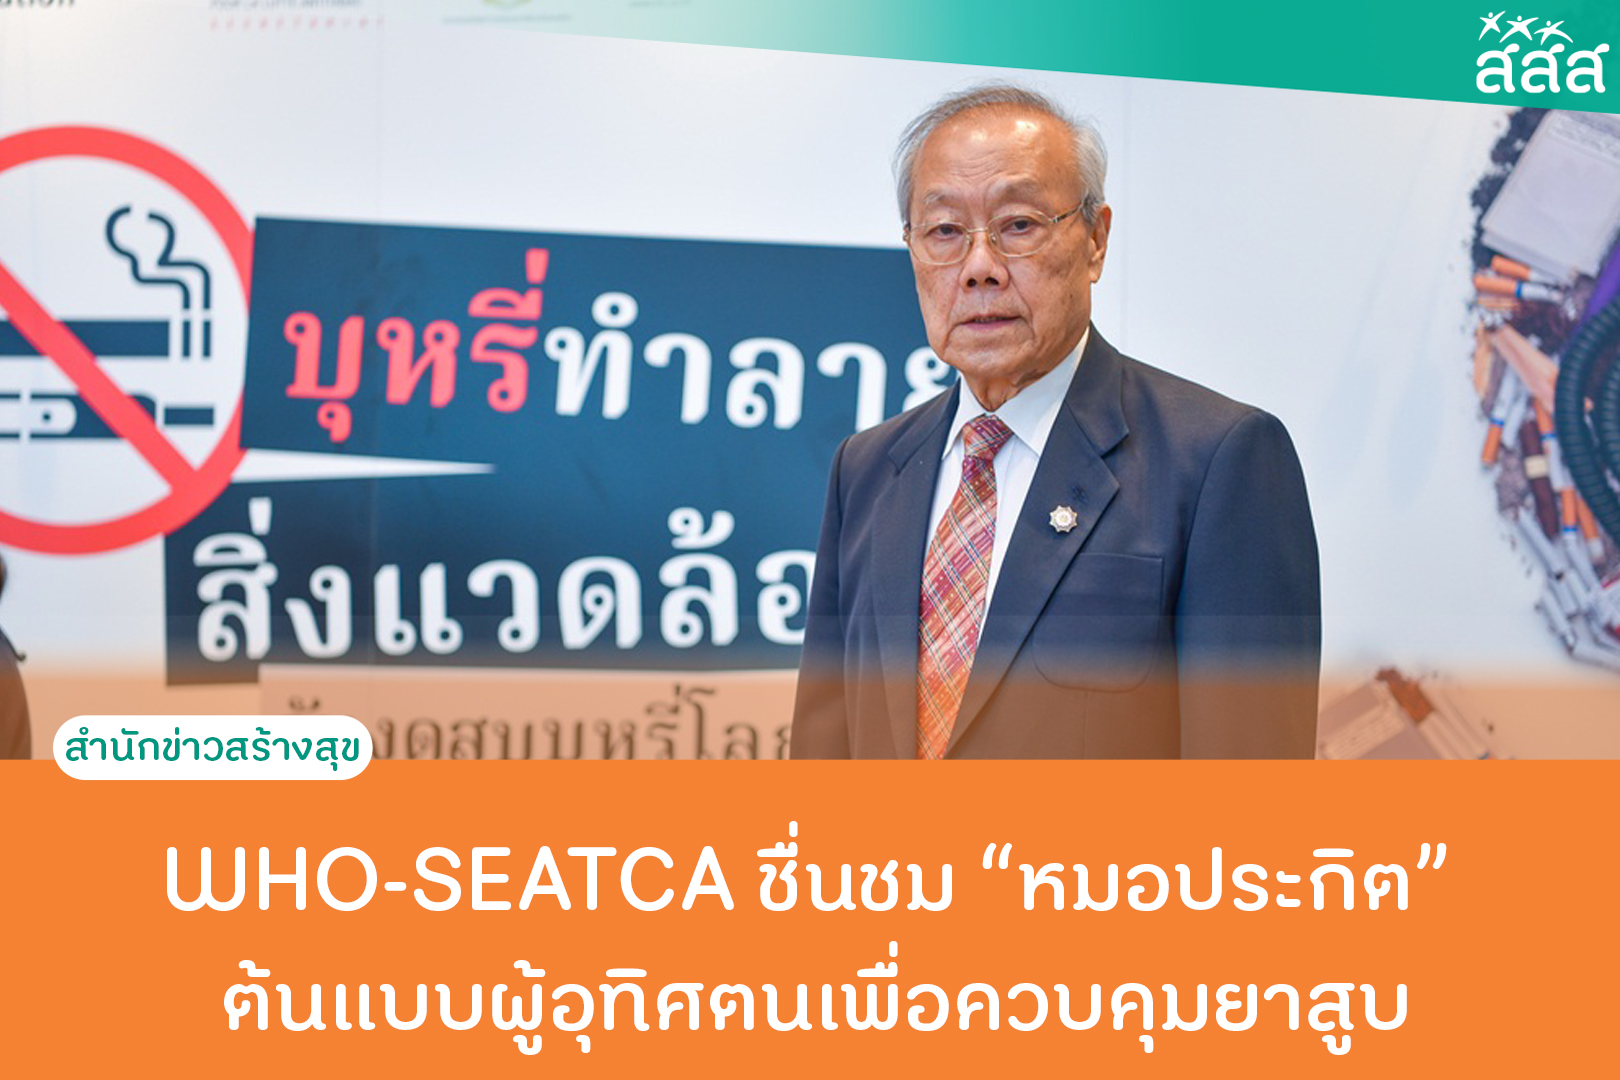 Dr Prakit praised as modern tobacco control model figure by WHO and SEATCA thaihealth